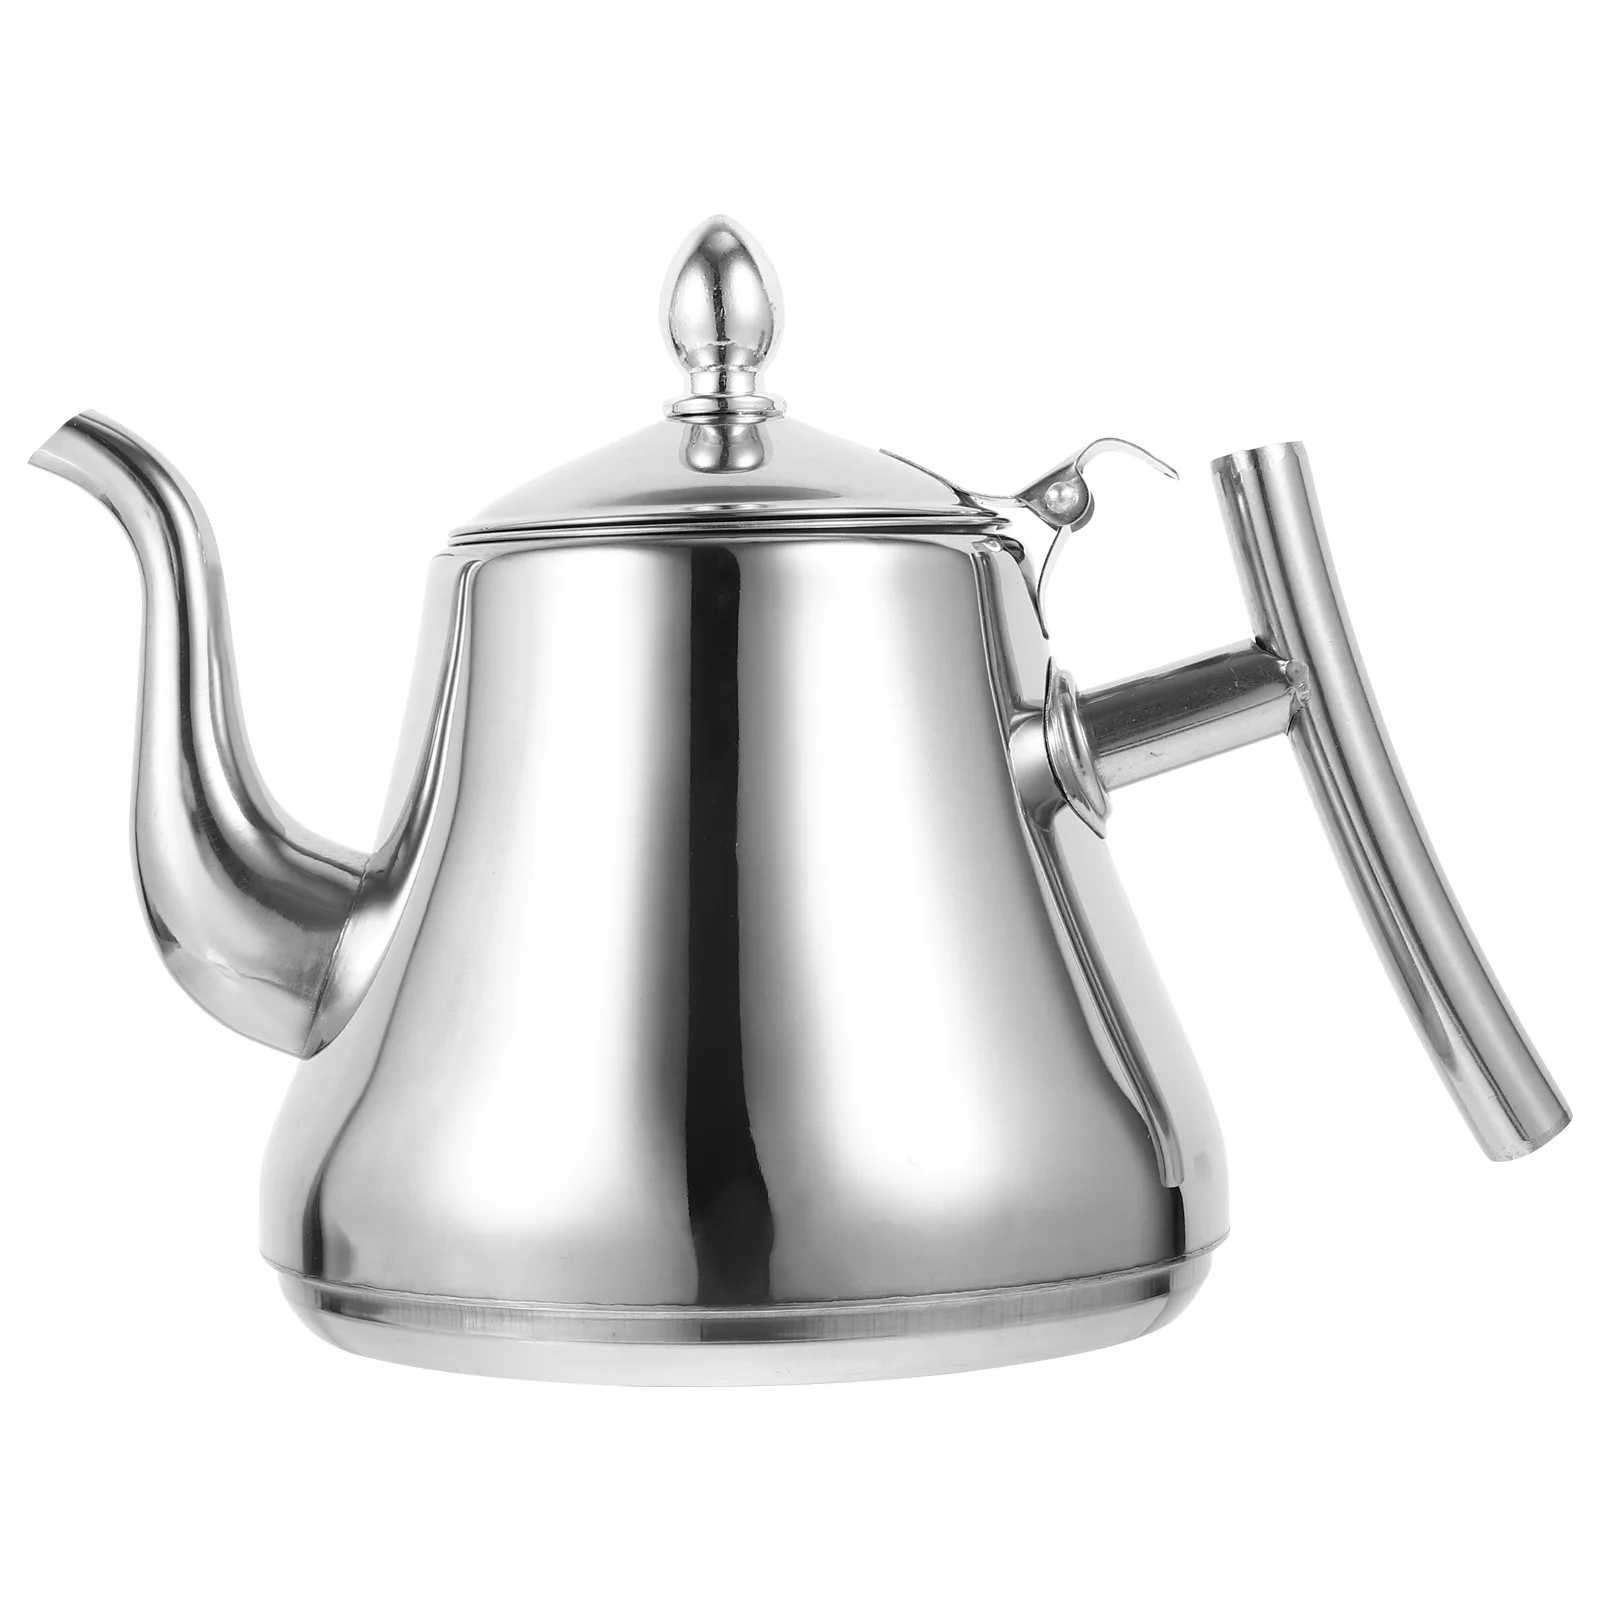 

Kettle Tea Coffee Teapot Pot Water Stovetop Stainless Steel Oil Pour Gooseneck Stove Whistling Boiling Over Spout Maker Olive